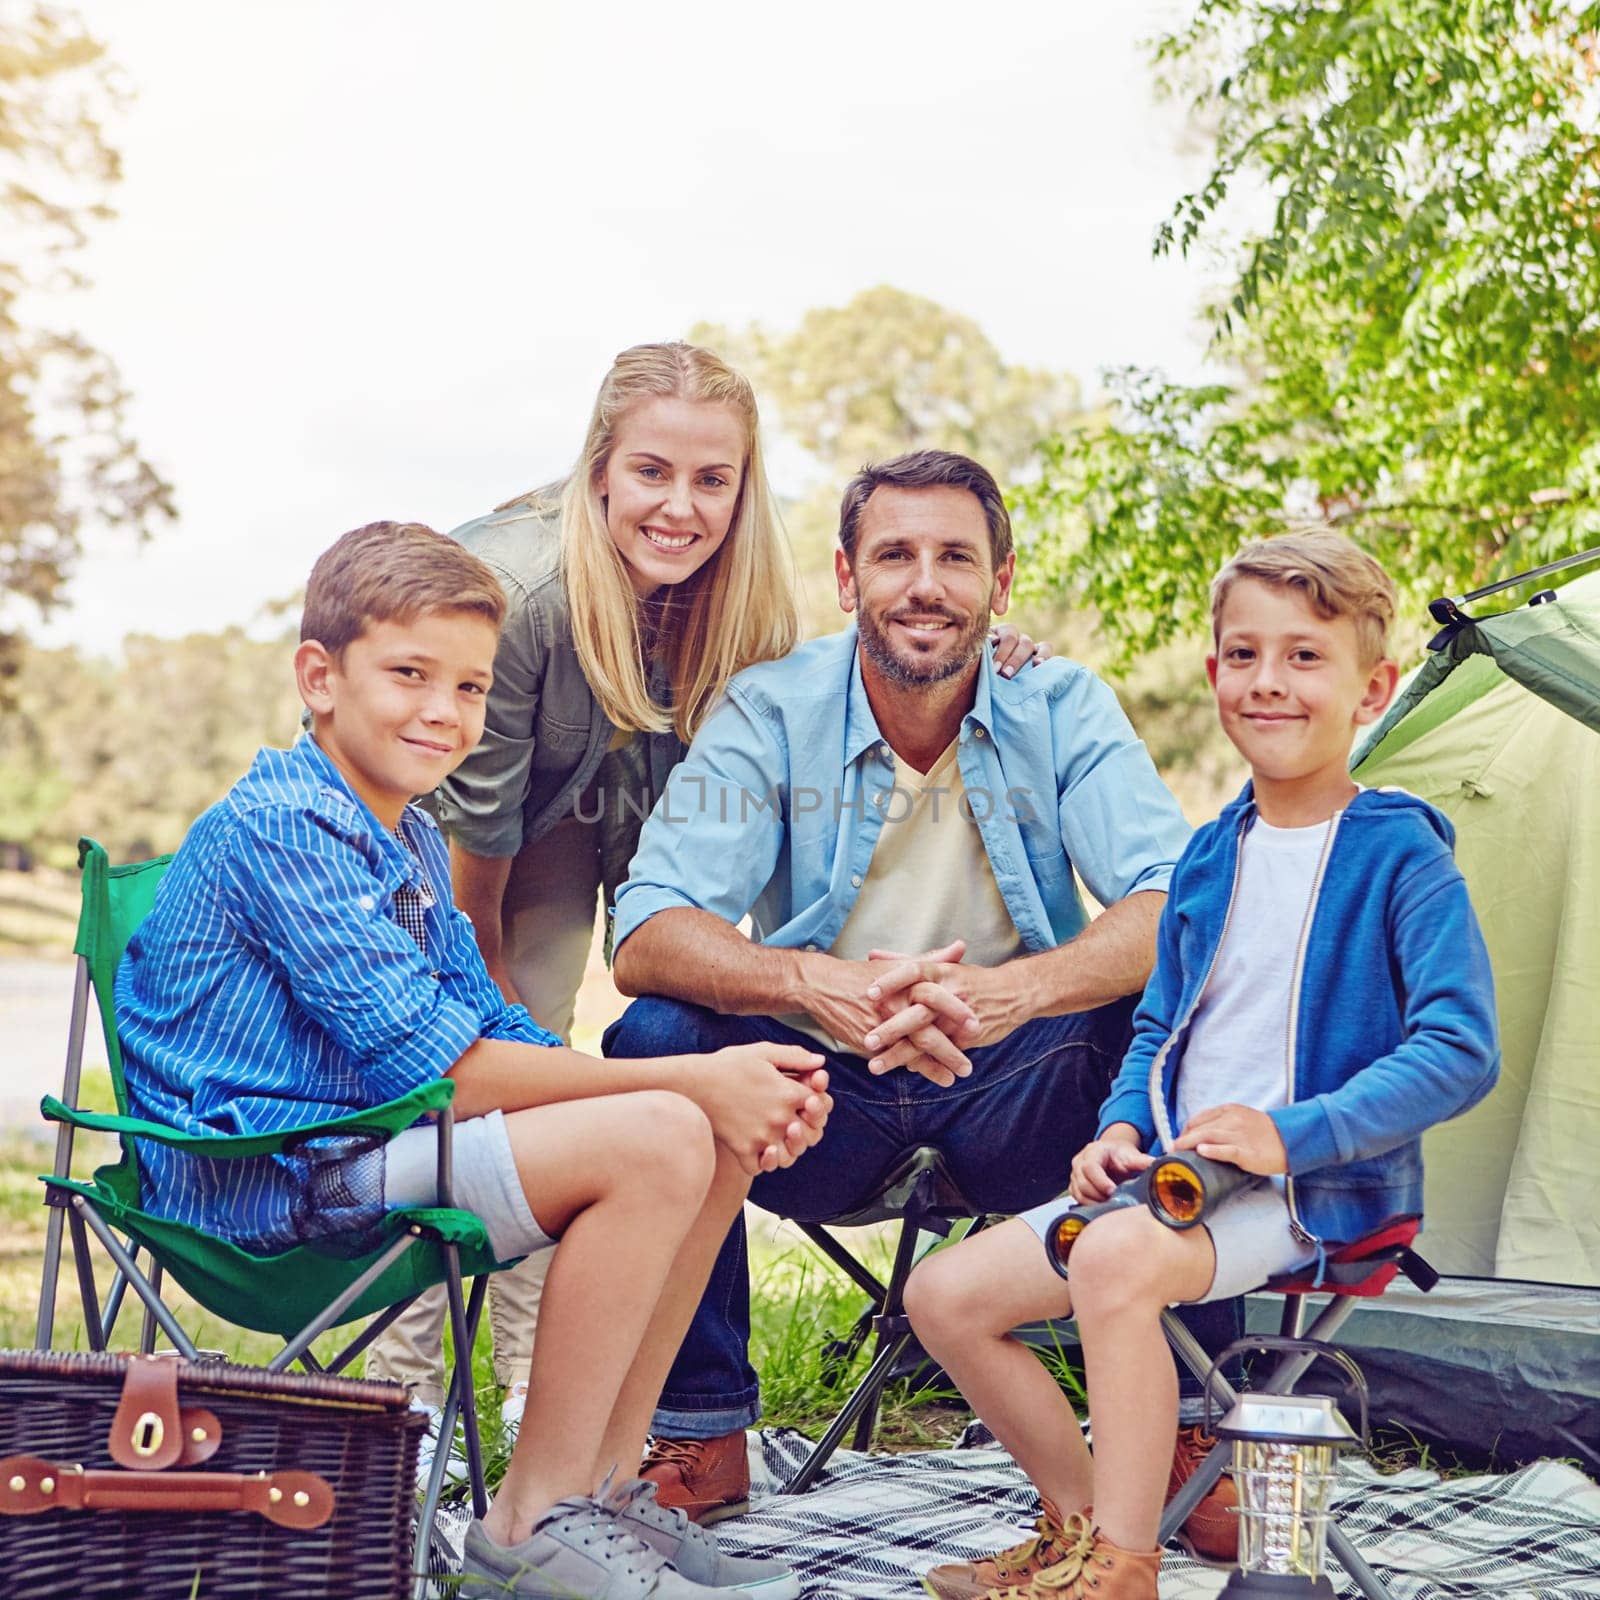 We love camping. Cropped portrait of a family of four camping in the woods